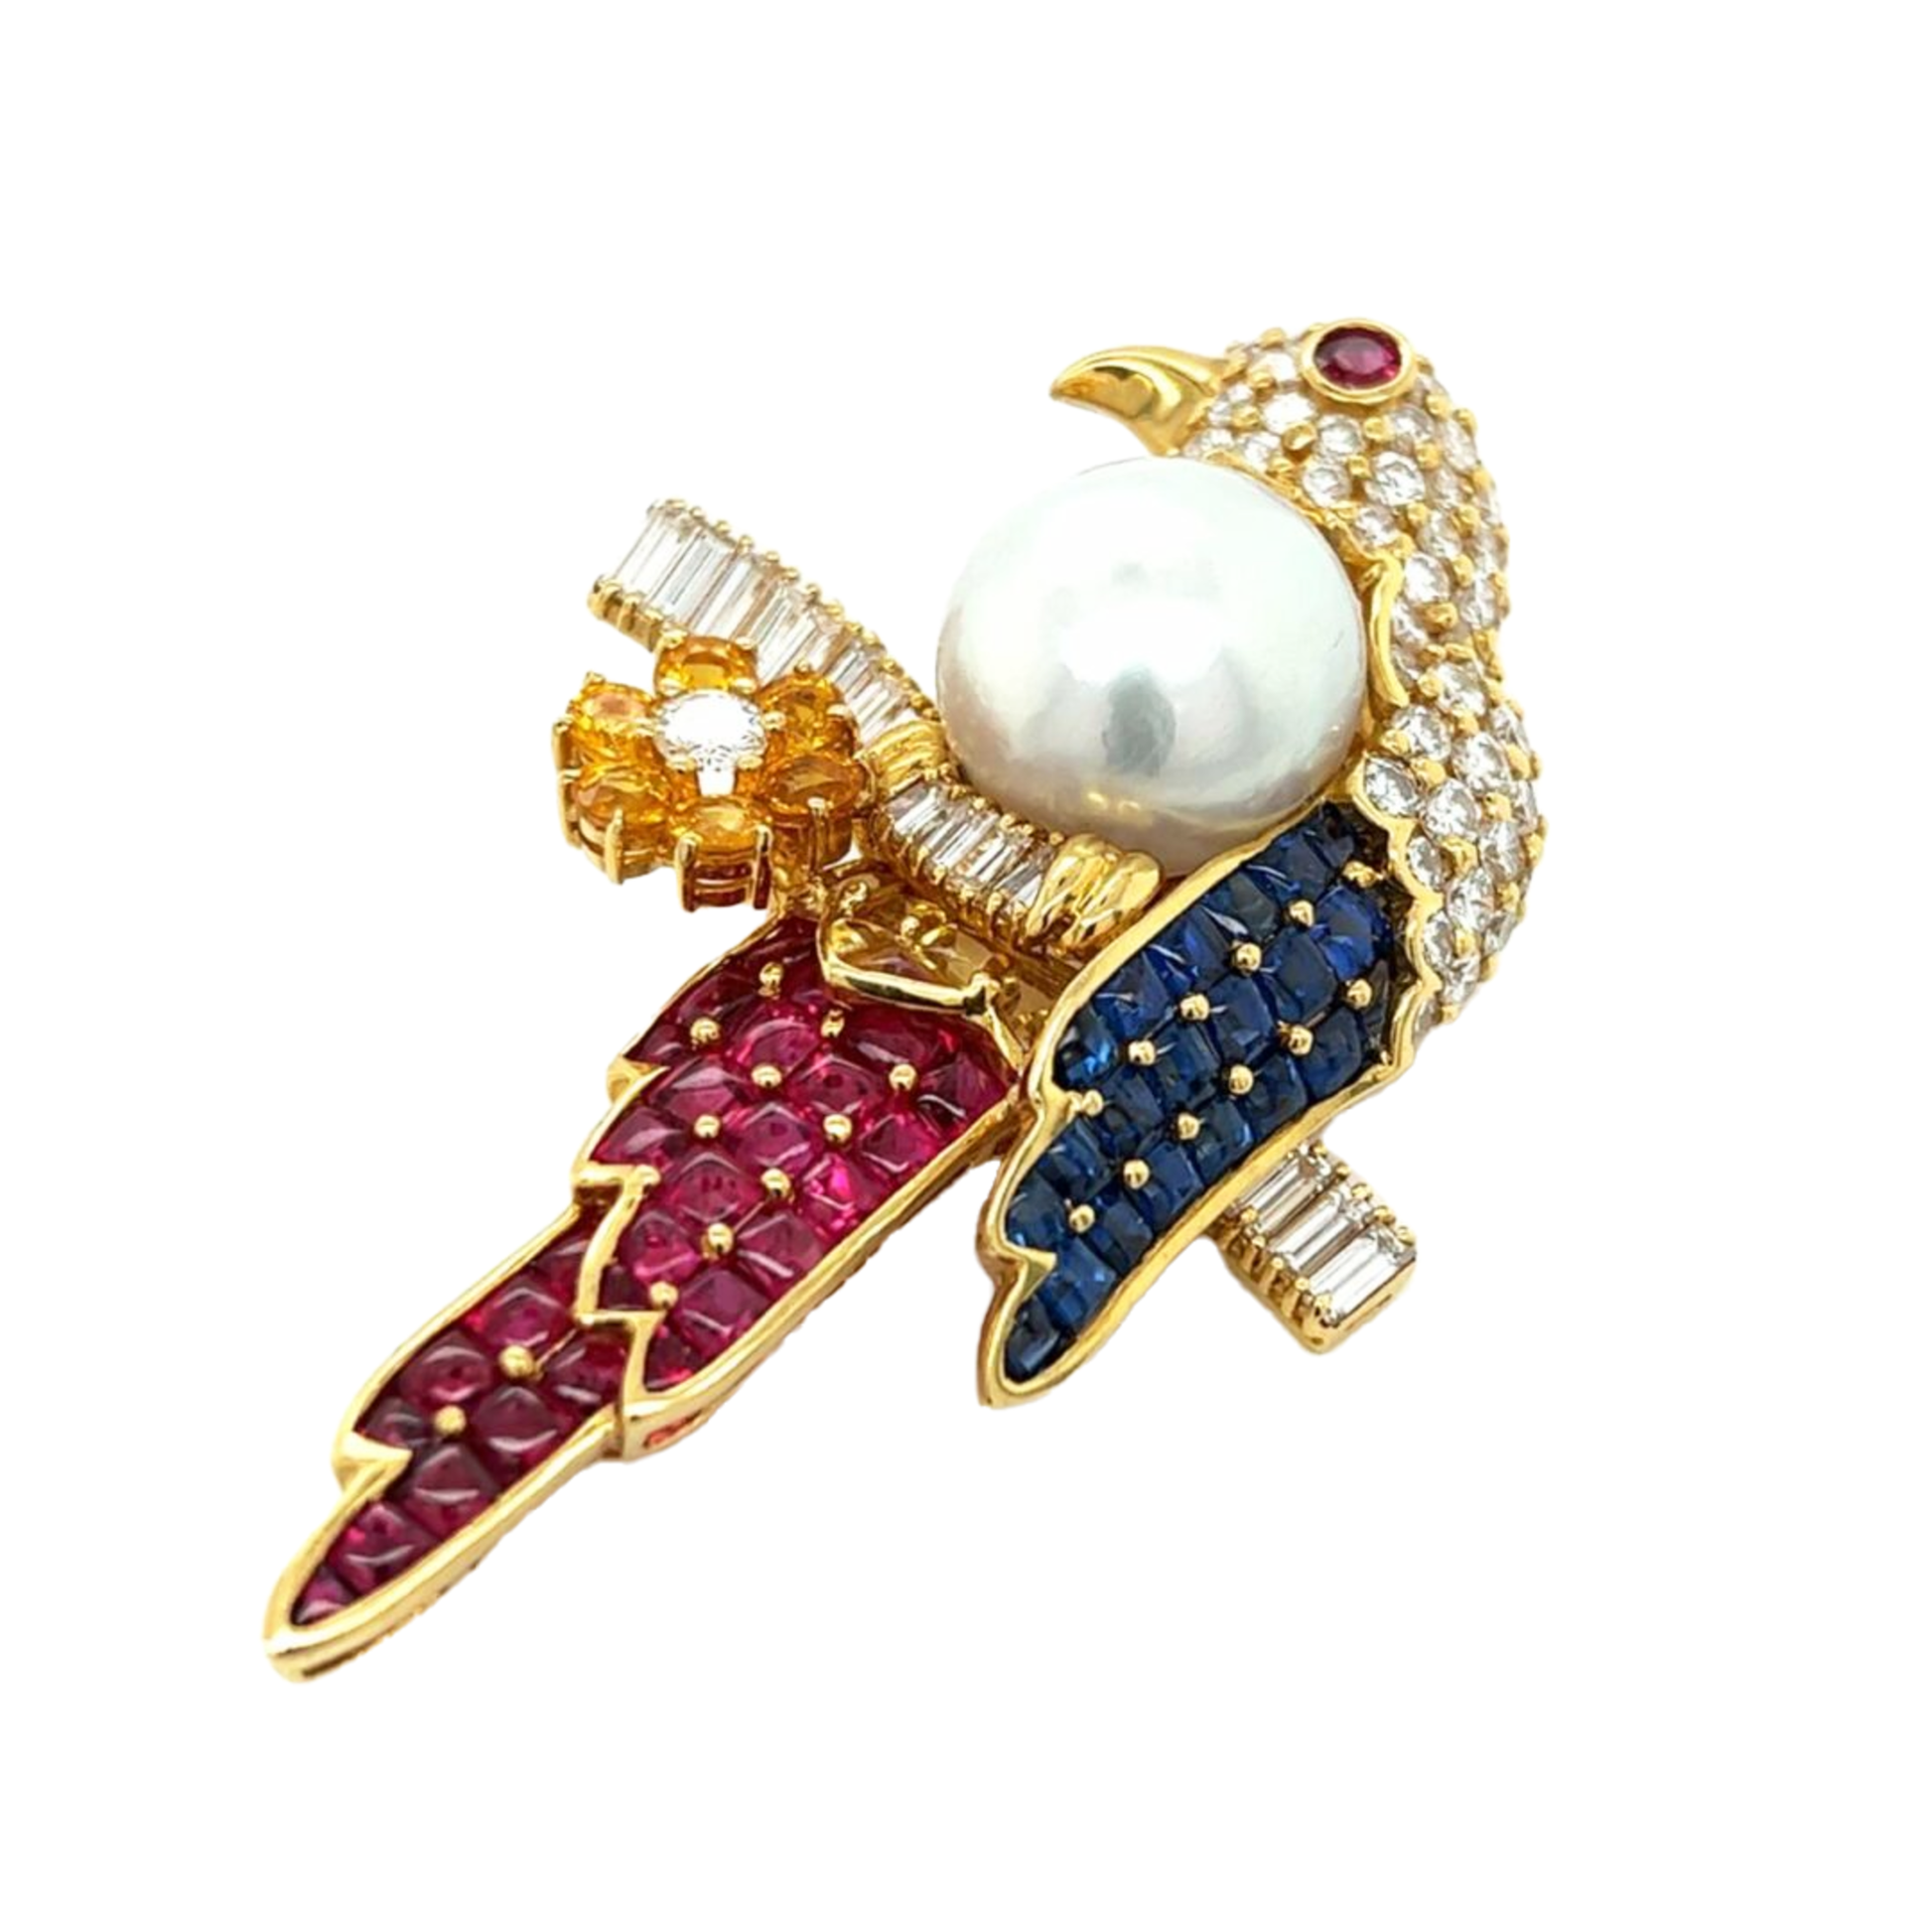 Post-1980s 18KT Yellow Gold Diamond, Cultured Pearl, Ruby & Sapphire Bird Brooch front side